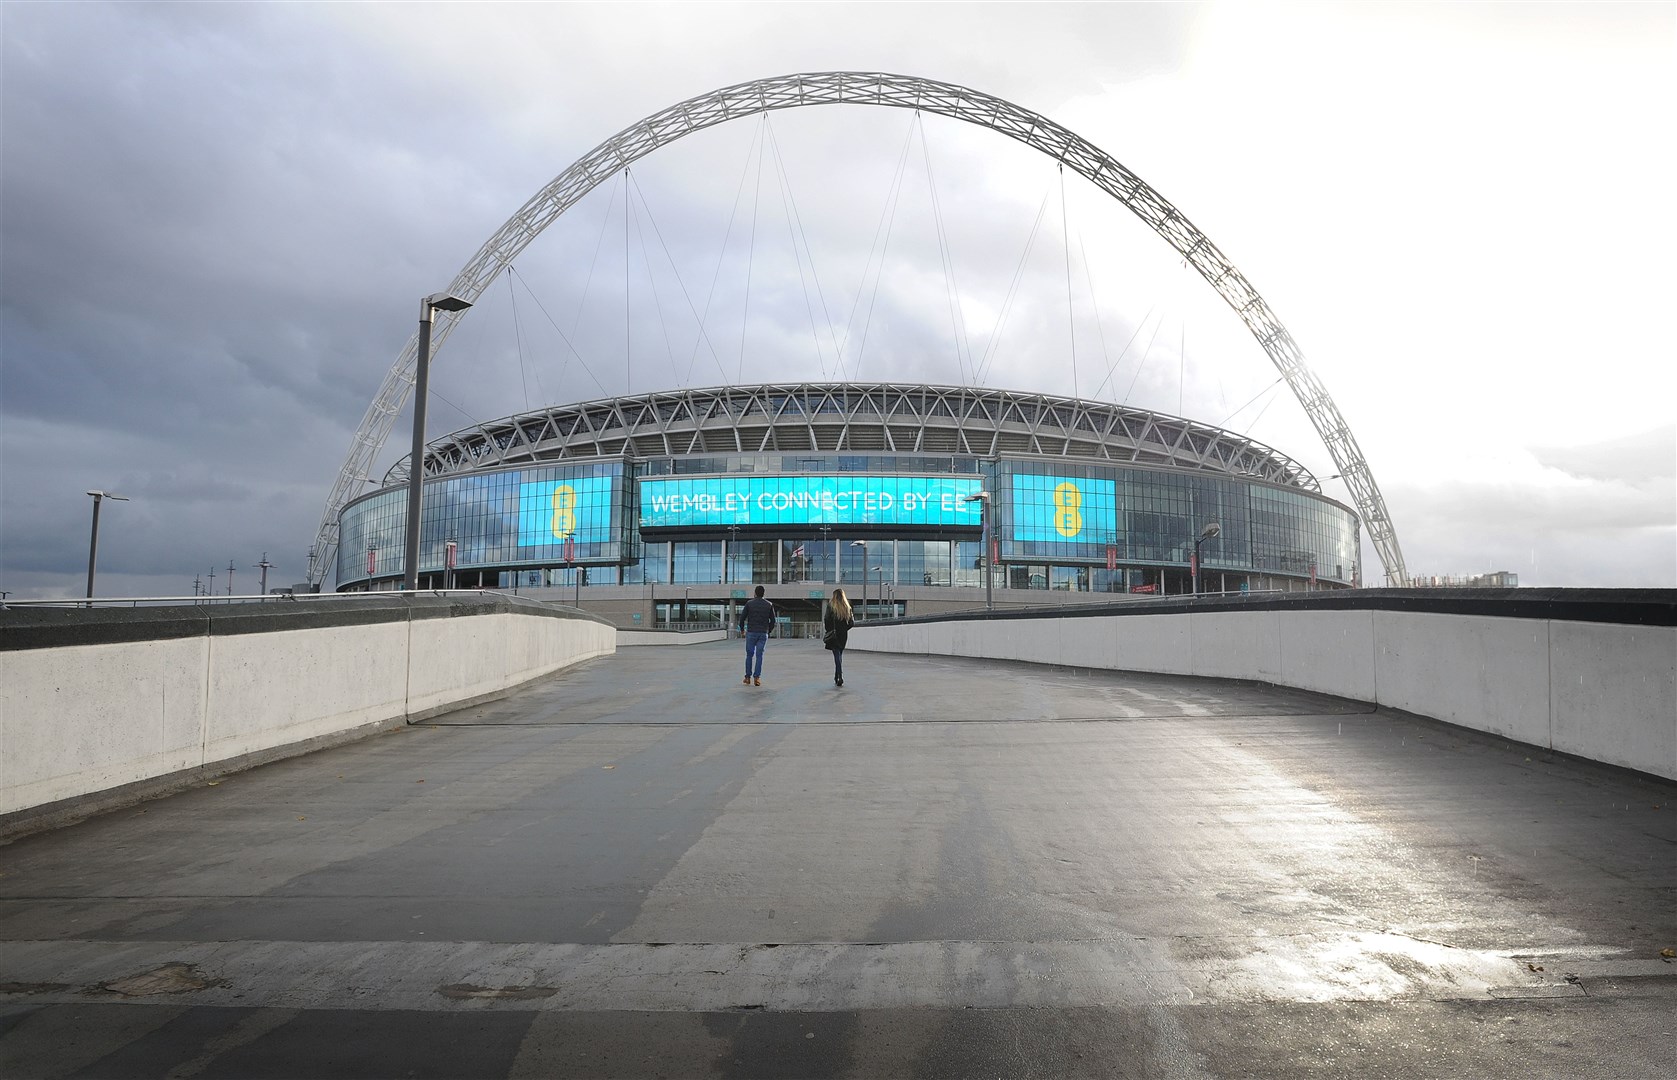 Kevin Brennan said he was bringing the Bill forward after an incident at Wembley stadium when between 3,000-5,000 ticketless people gained entry (Nick Ansell/PA)